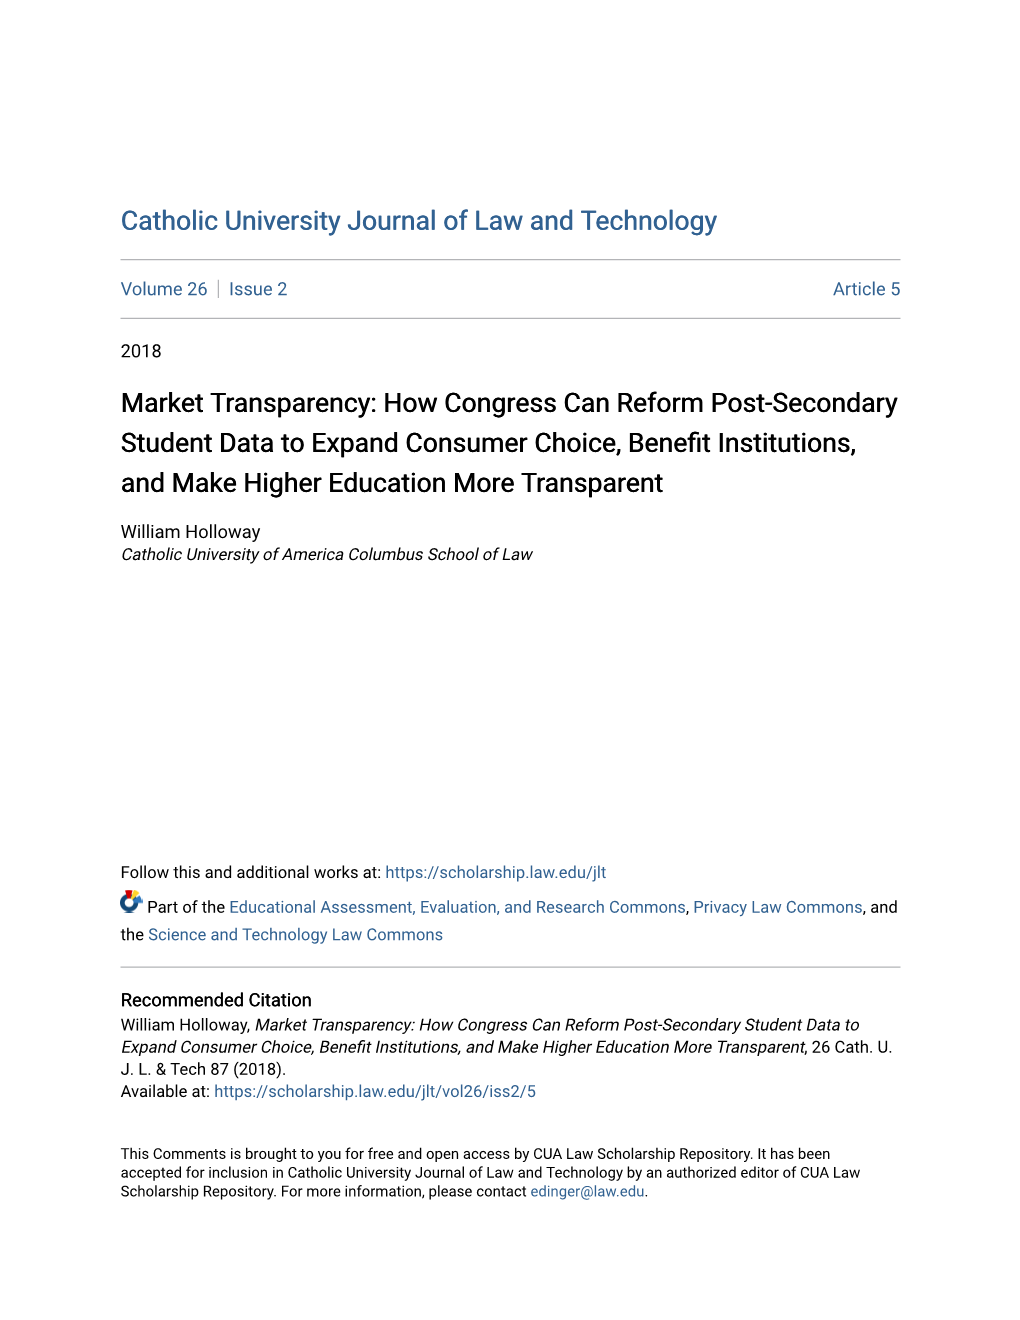 How Congress Can Reform Post-Secondary Student Data to Expand Consumer Choice, Benefit Institutions, and Make Higher Education More Transparent